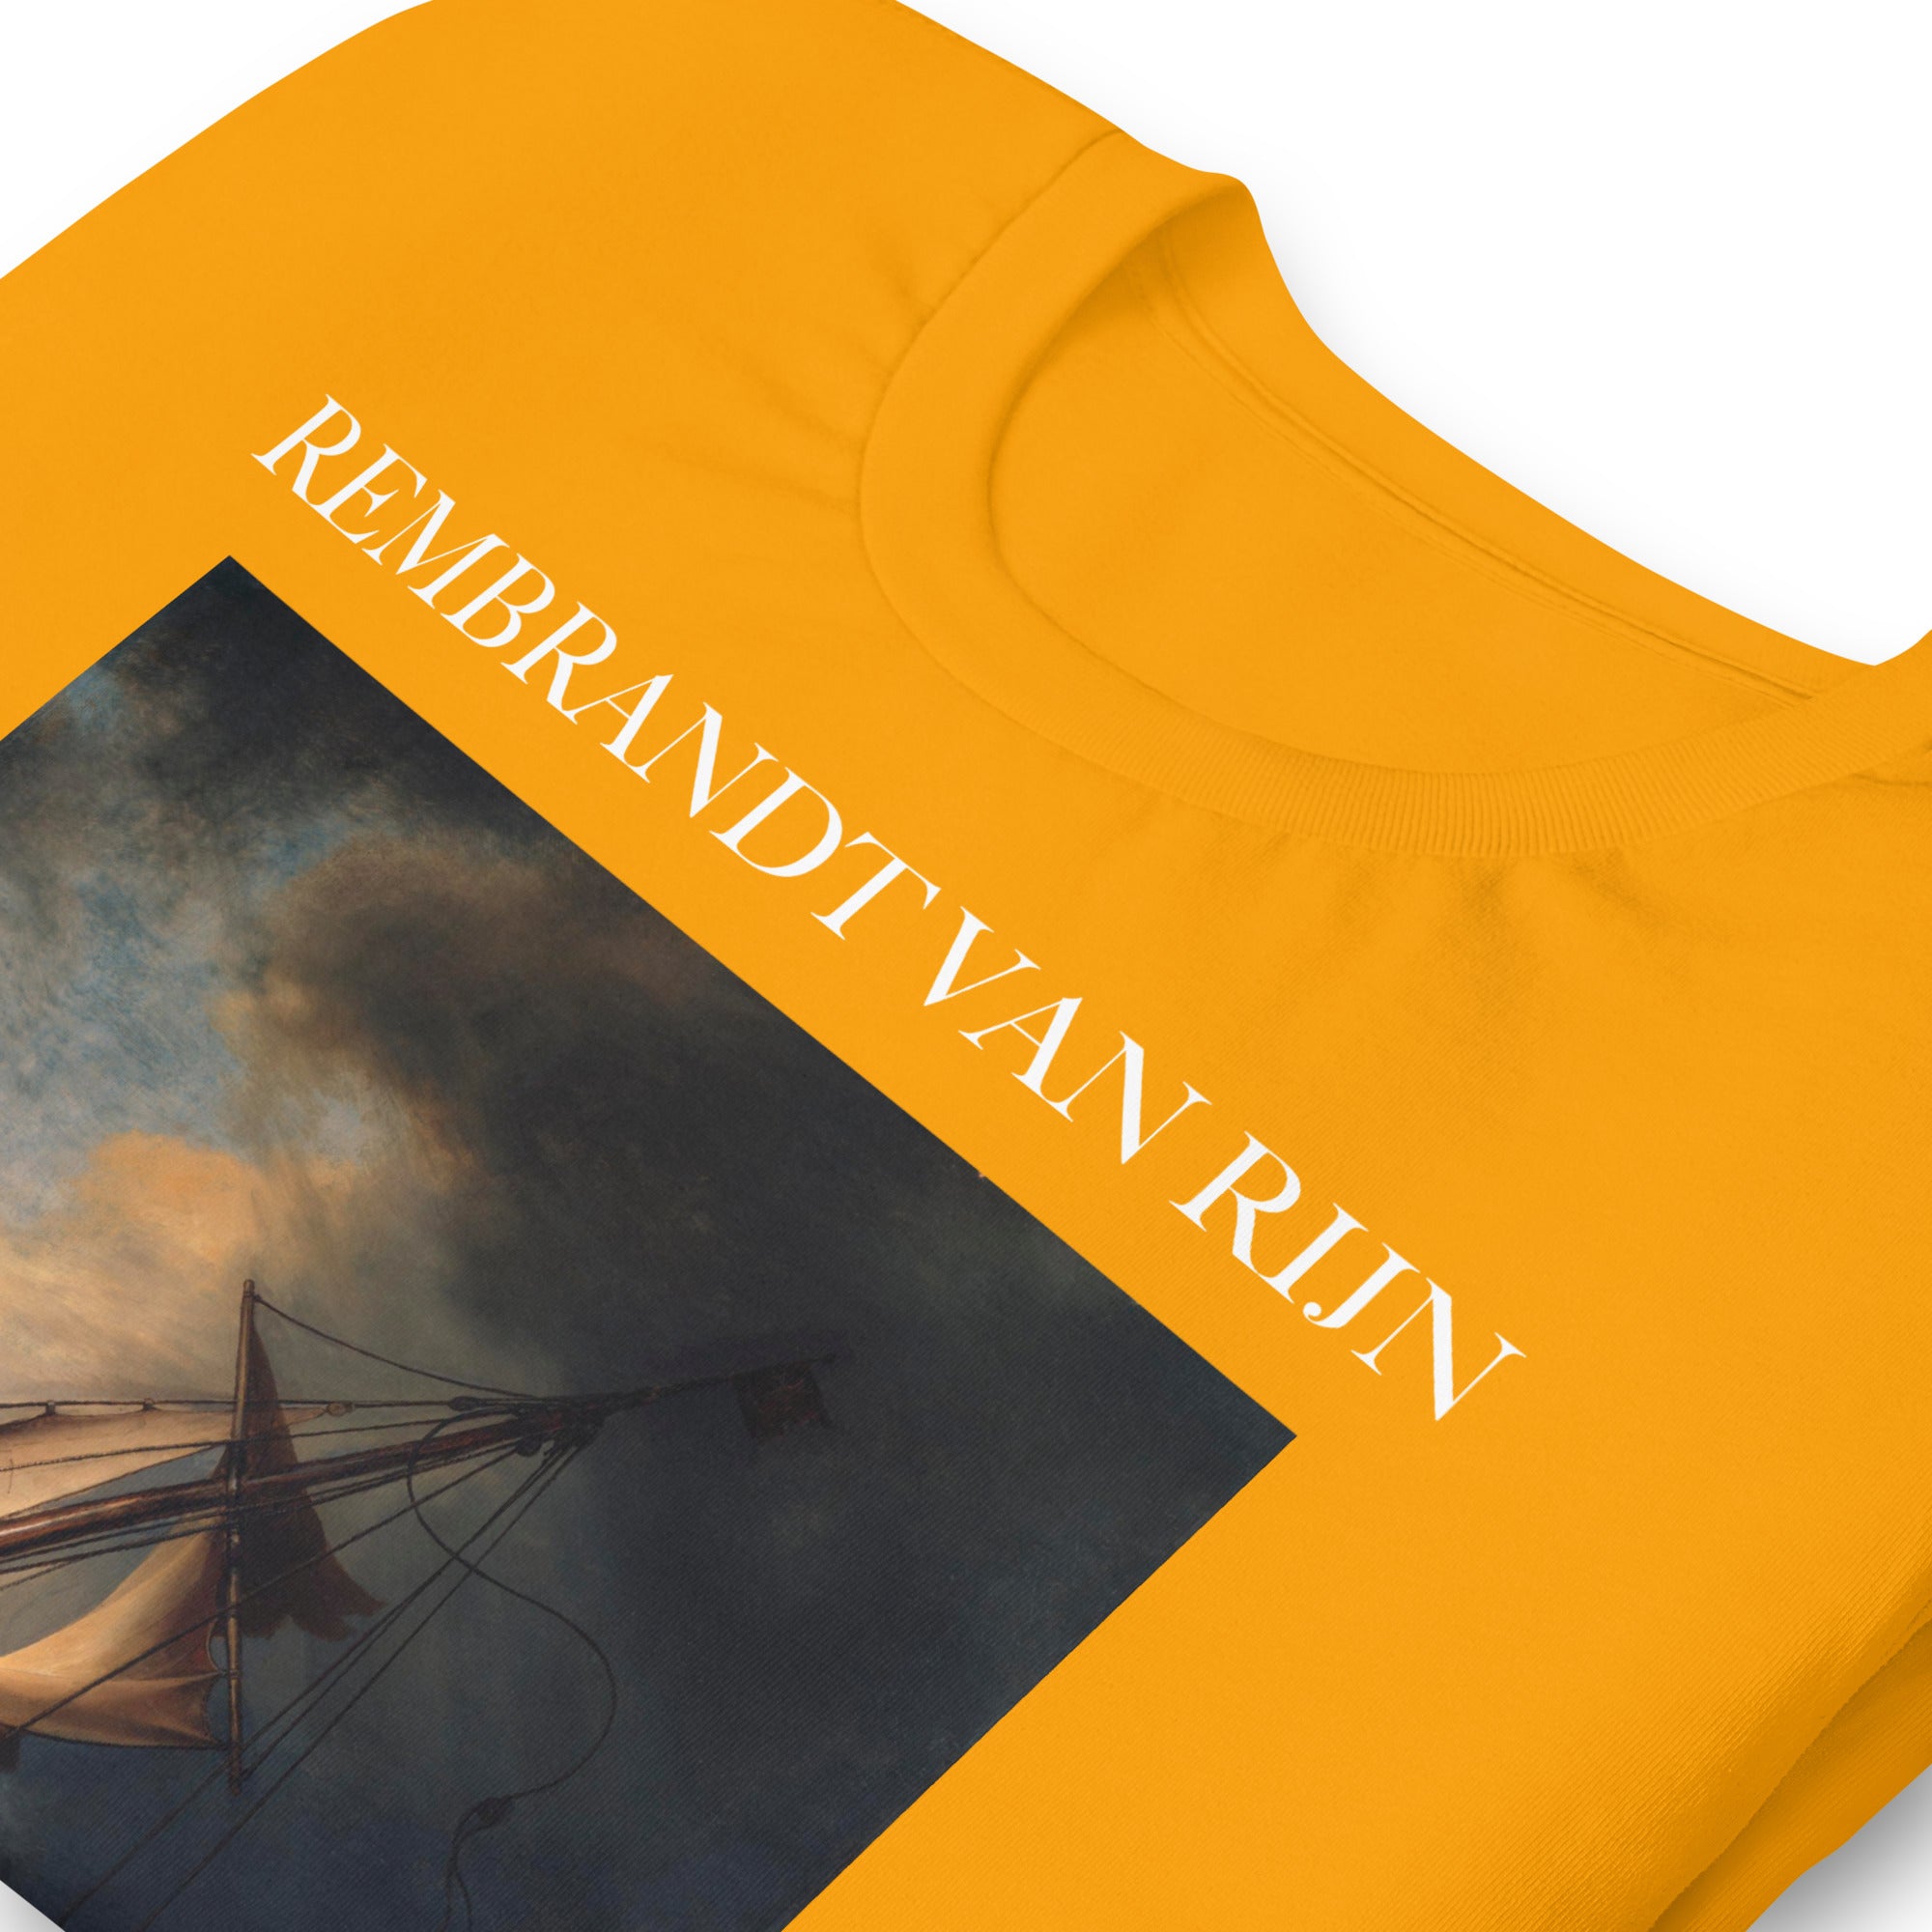 Rembrandt van Rijn 'The Storm on the Sea of Galilee' Famous Painting T-Shirt | Unisex Classic Art Tee